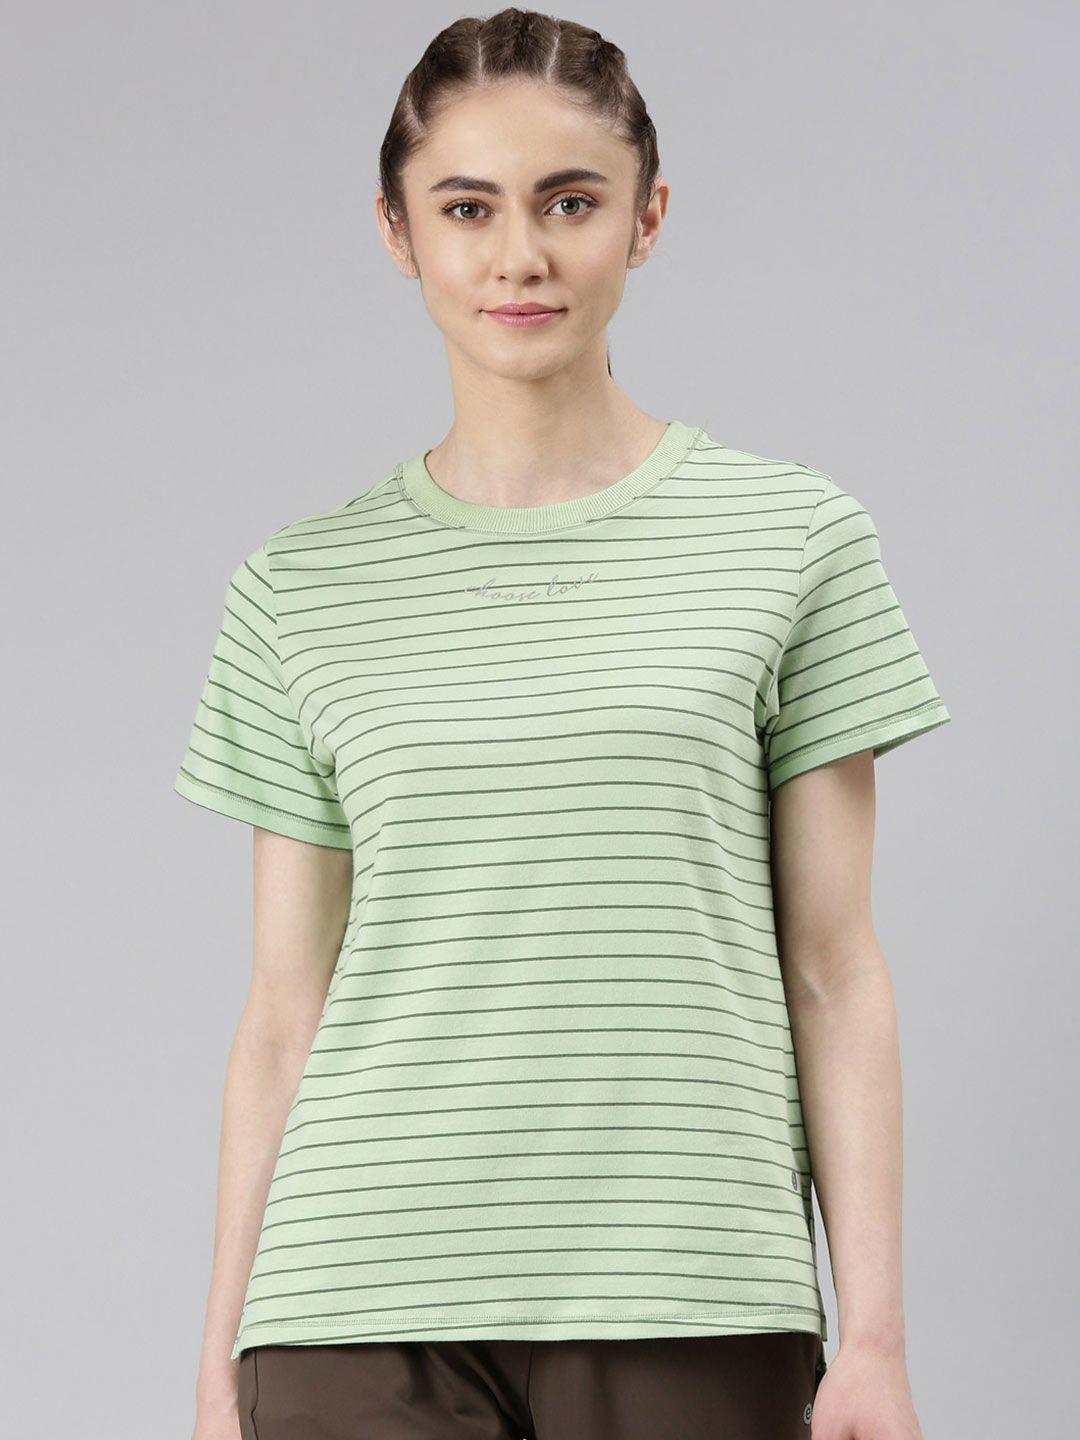 enamor-striped-antimicrobial-active-cotton-t-shirt